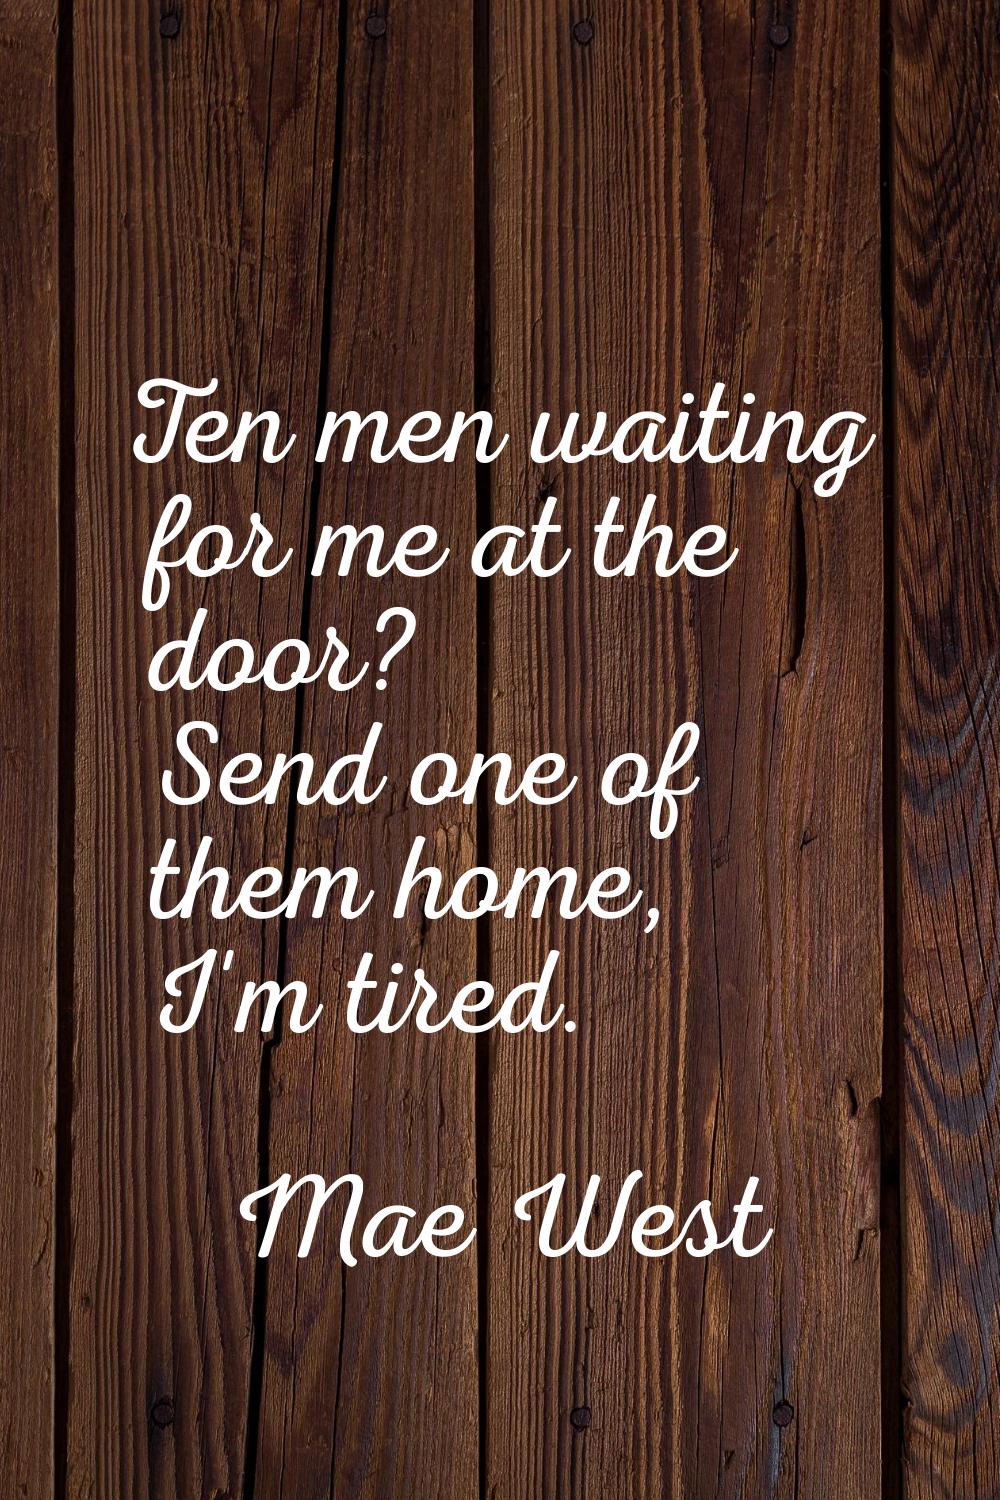 Ten men waiting for me at the door? Send one of them home, I'm tired.